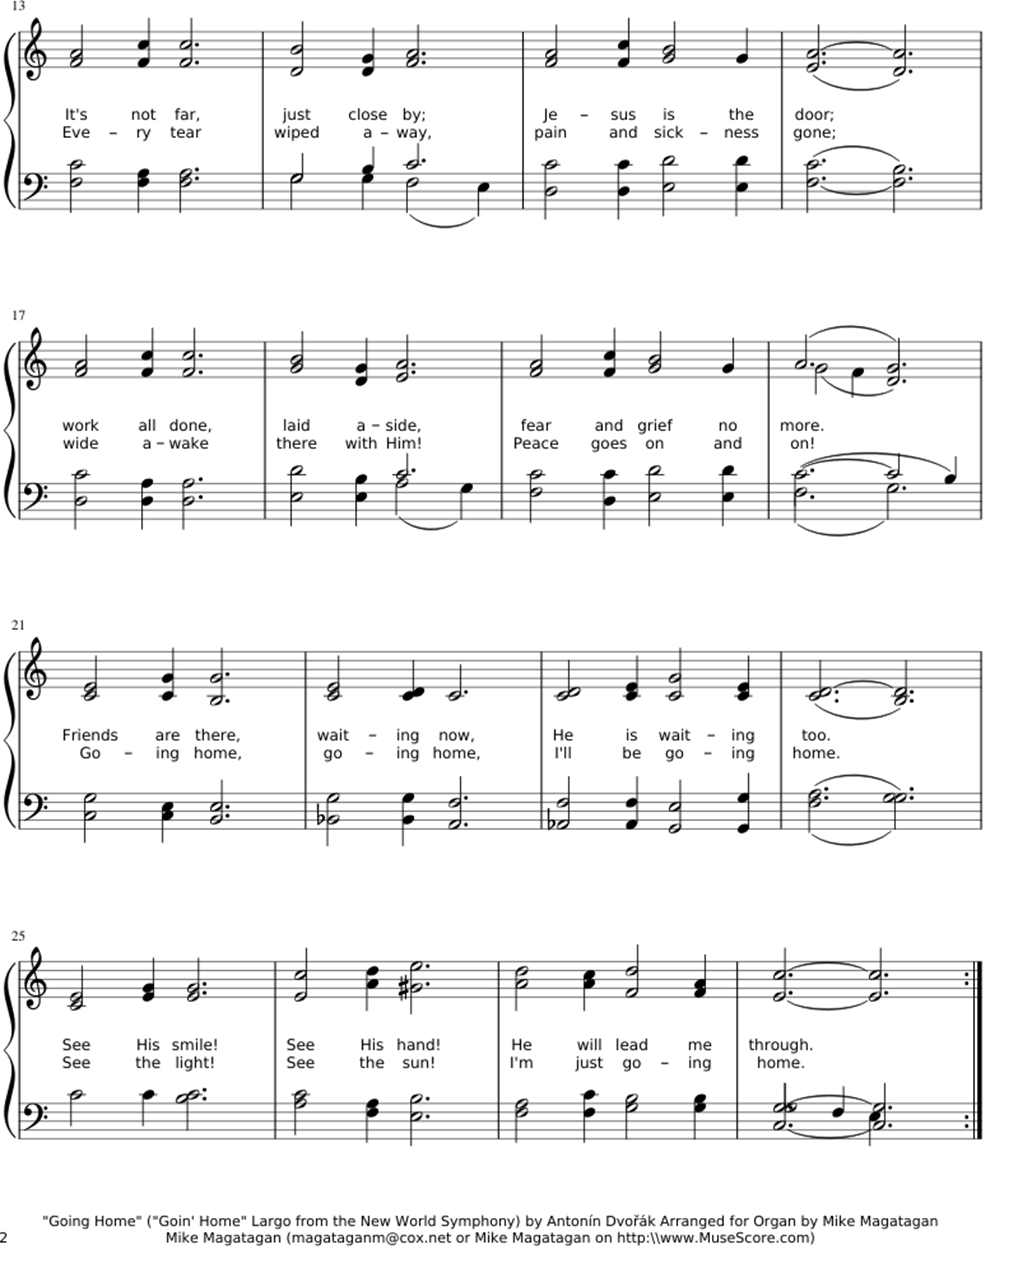 Going home sheet music notes 2